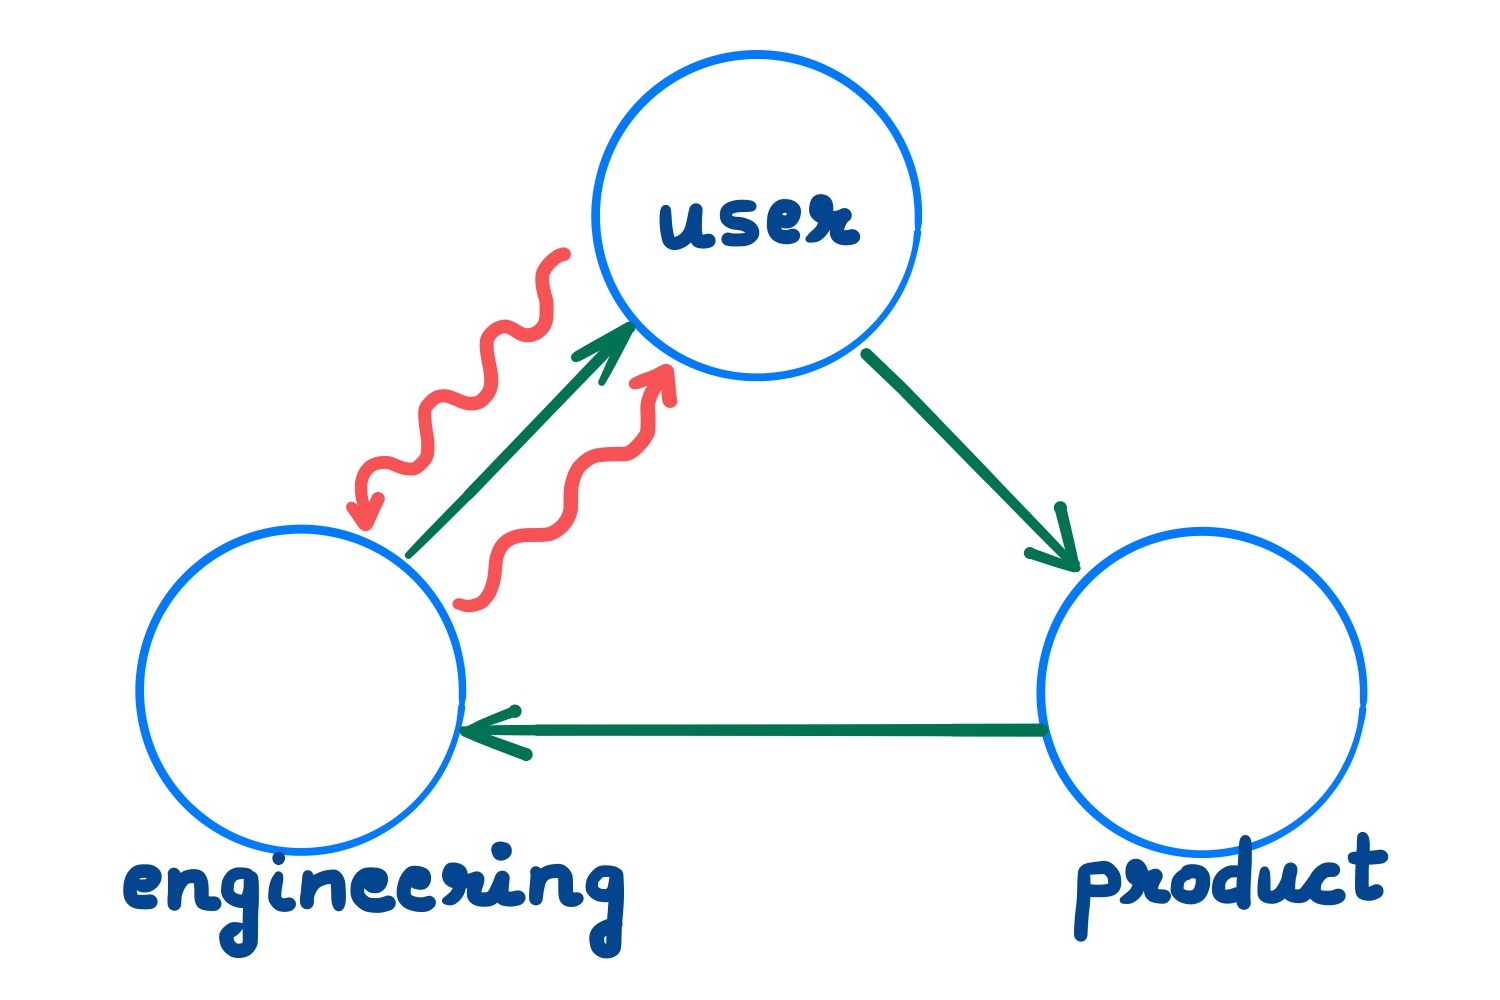 Regular product development as green arrows; Innovation loops as red squiggles.